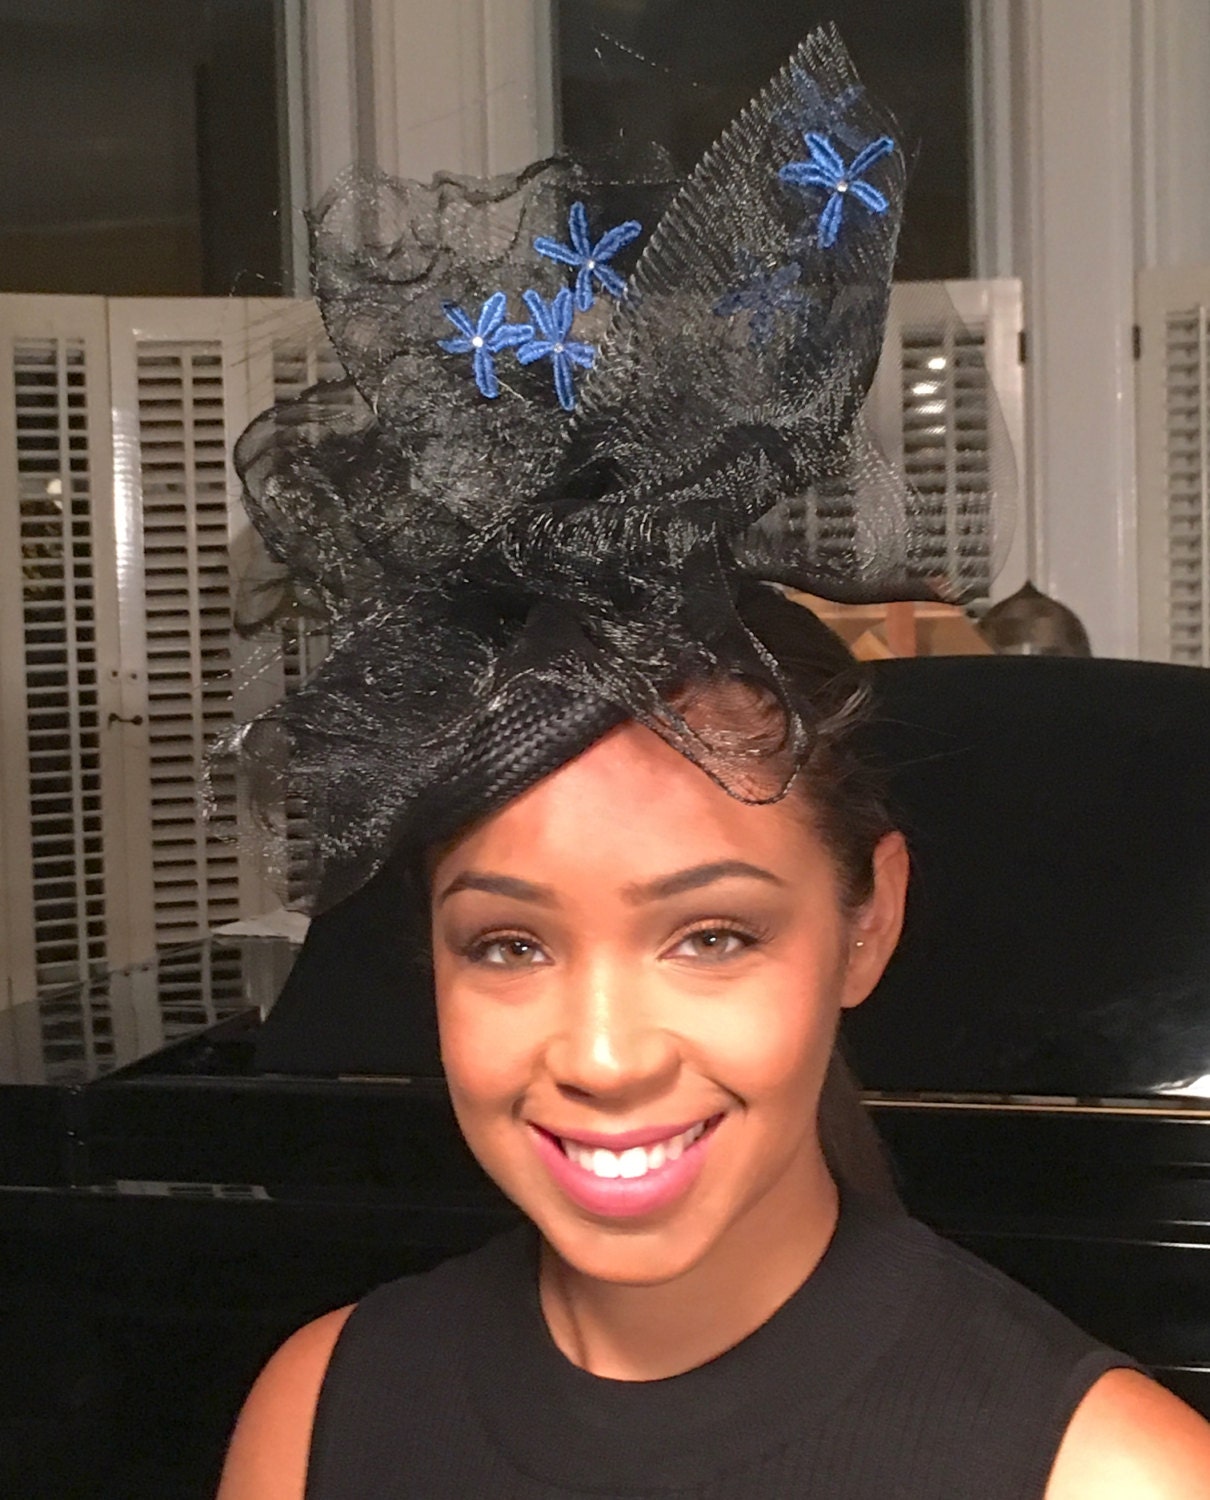 Black Straw Fascinator with Black Crinoline and Royal Blue Appliqué Flowers-Royal Ascot Races-Kentucky Derby Races-Cocktail Hat-Church Hat